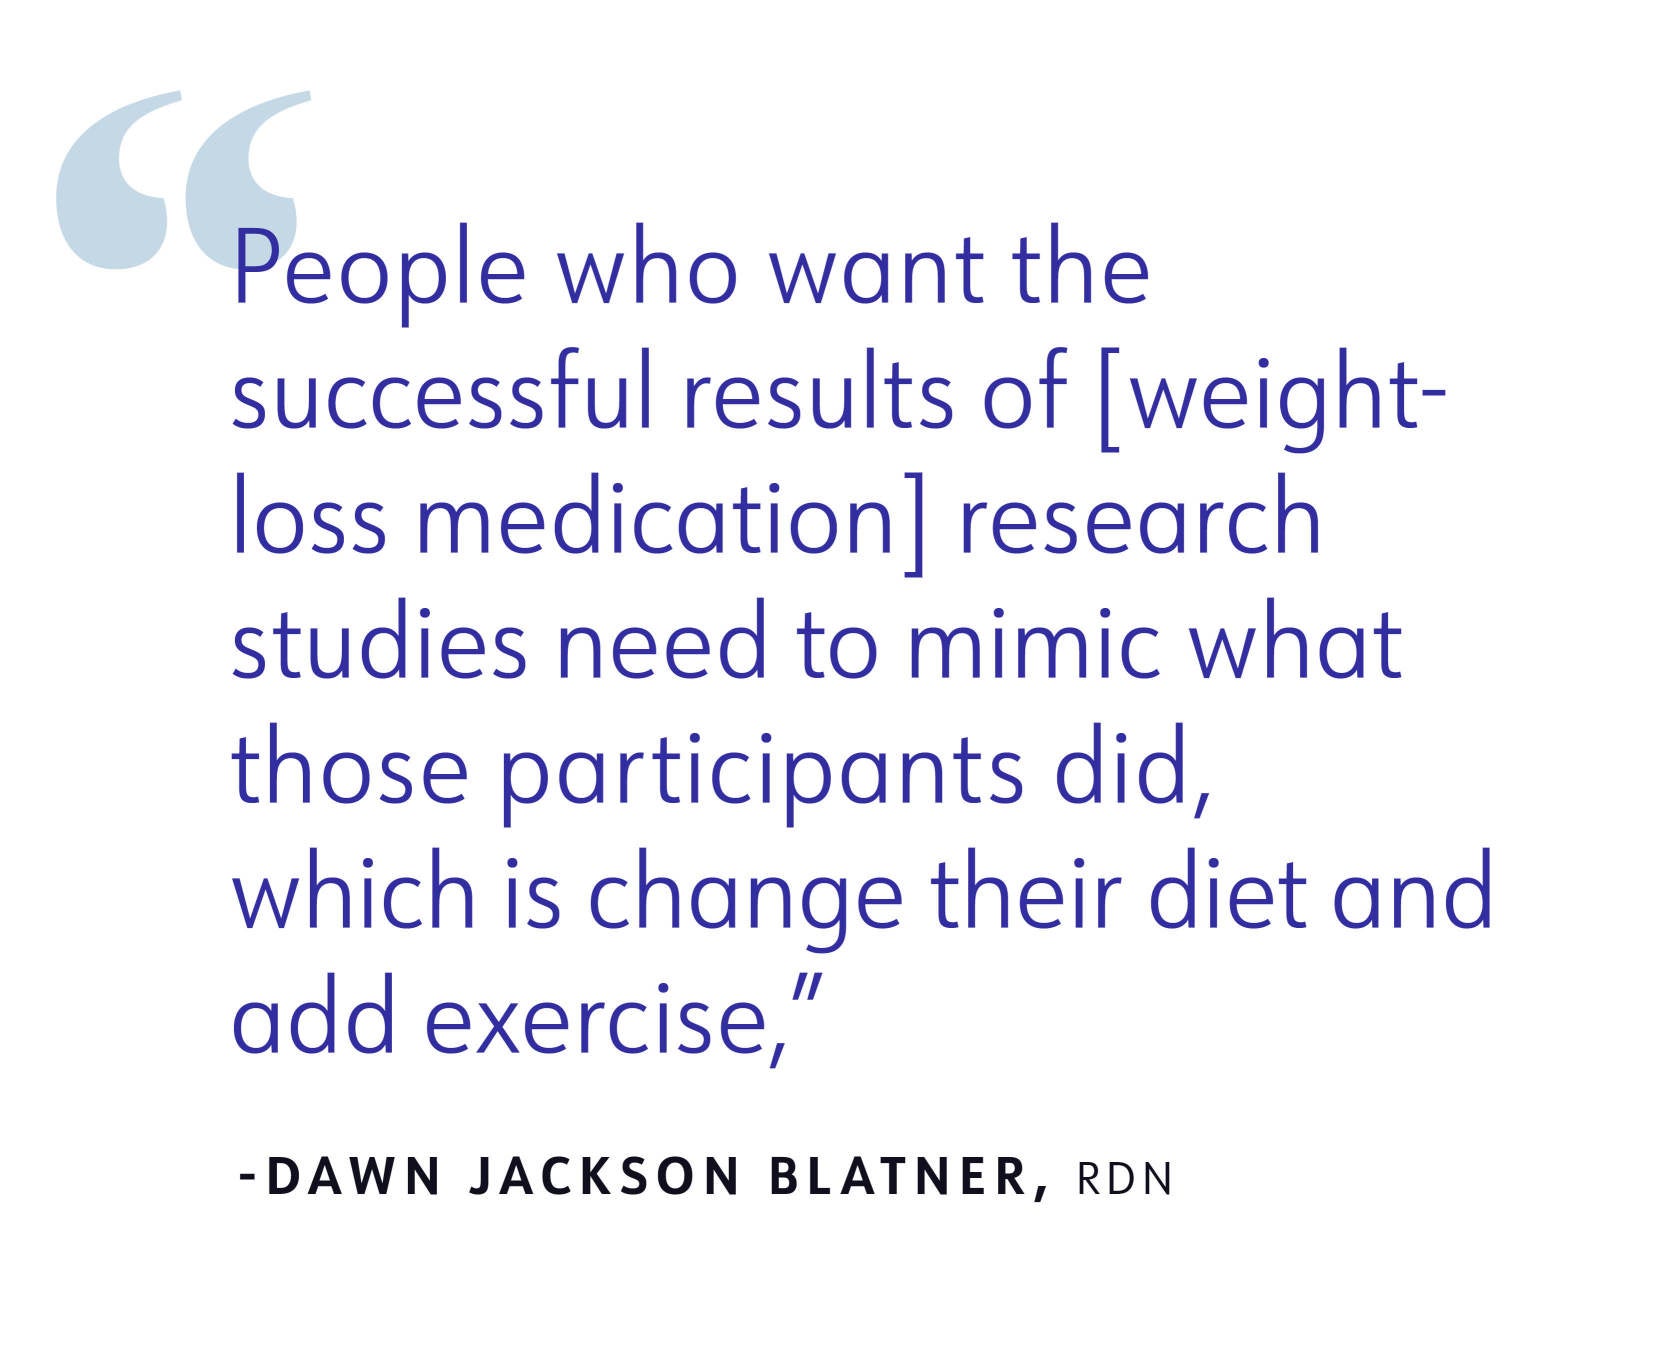 “People who want the successful results of [weight-loss medication] research studies need to mimic what those participants did, which is change their diet and add exercise,” -Dawn Jackson Blatner, RDN